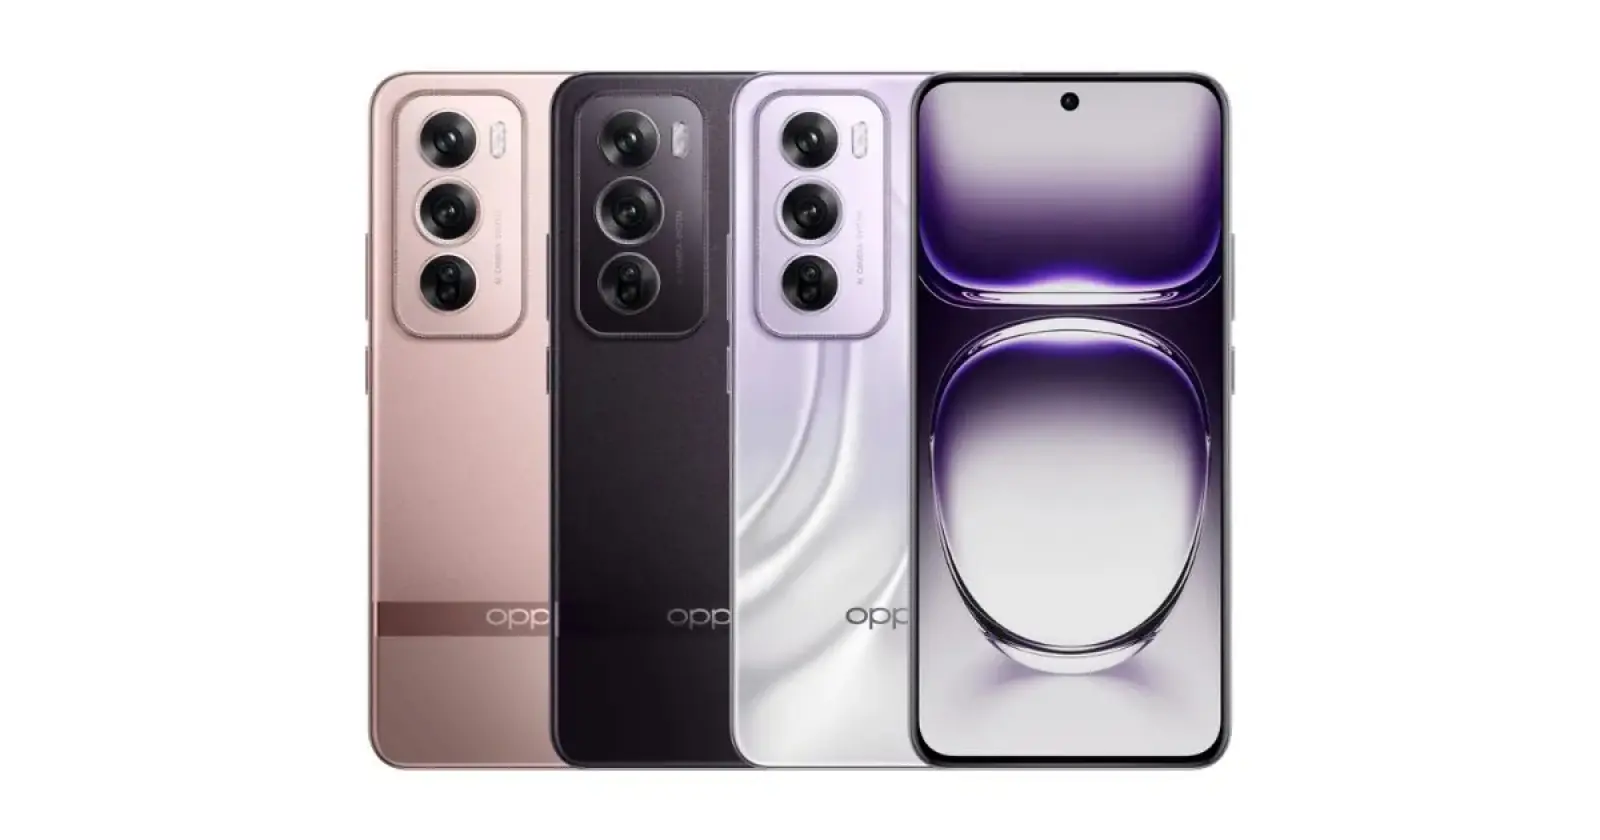 Oppo Reno 12 series will be launched globally soon, smartphones will be equipped with AI features